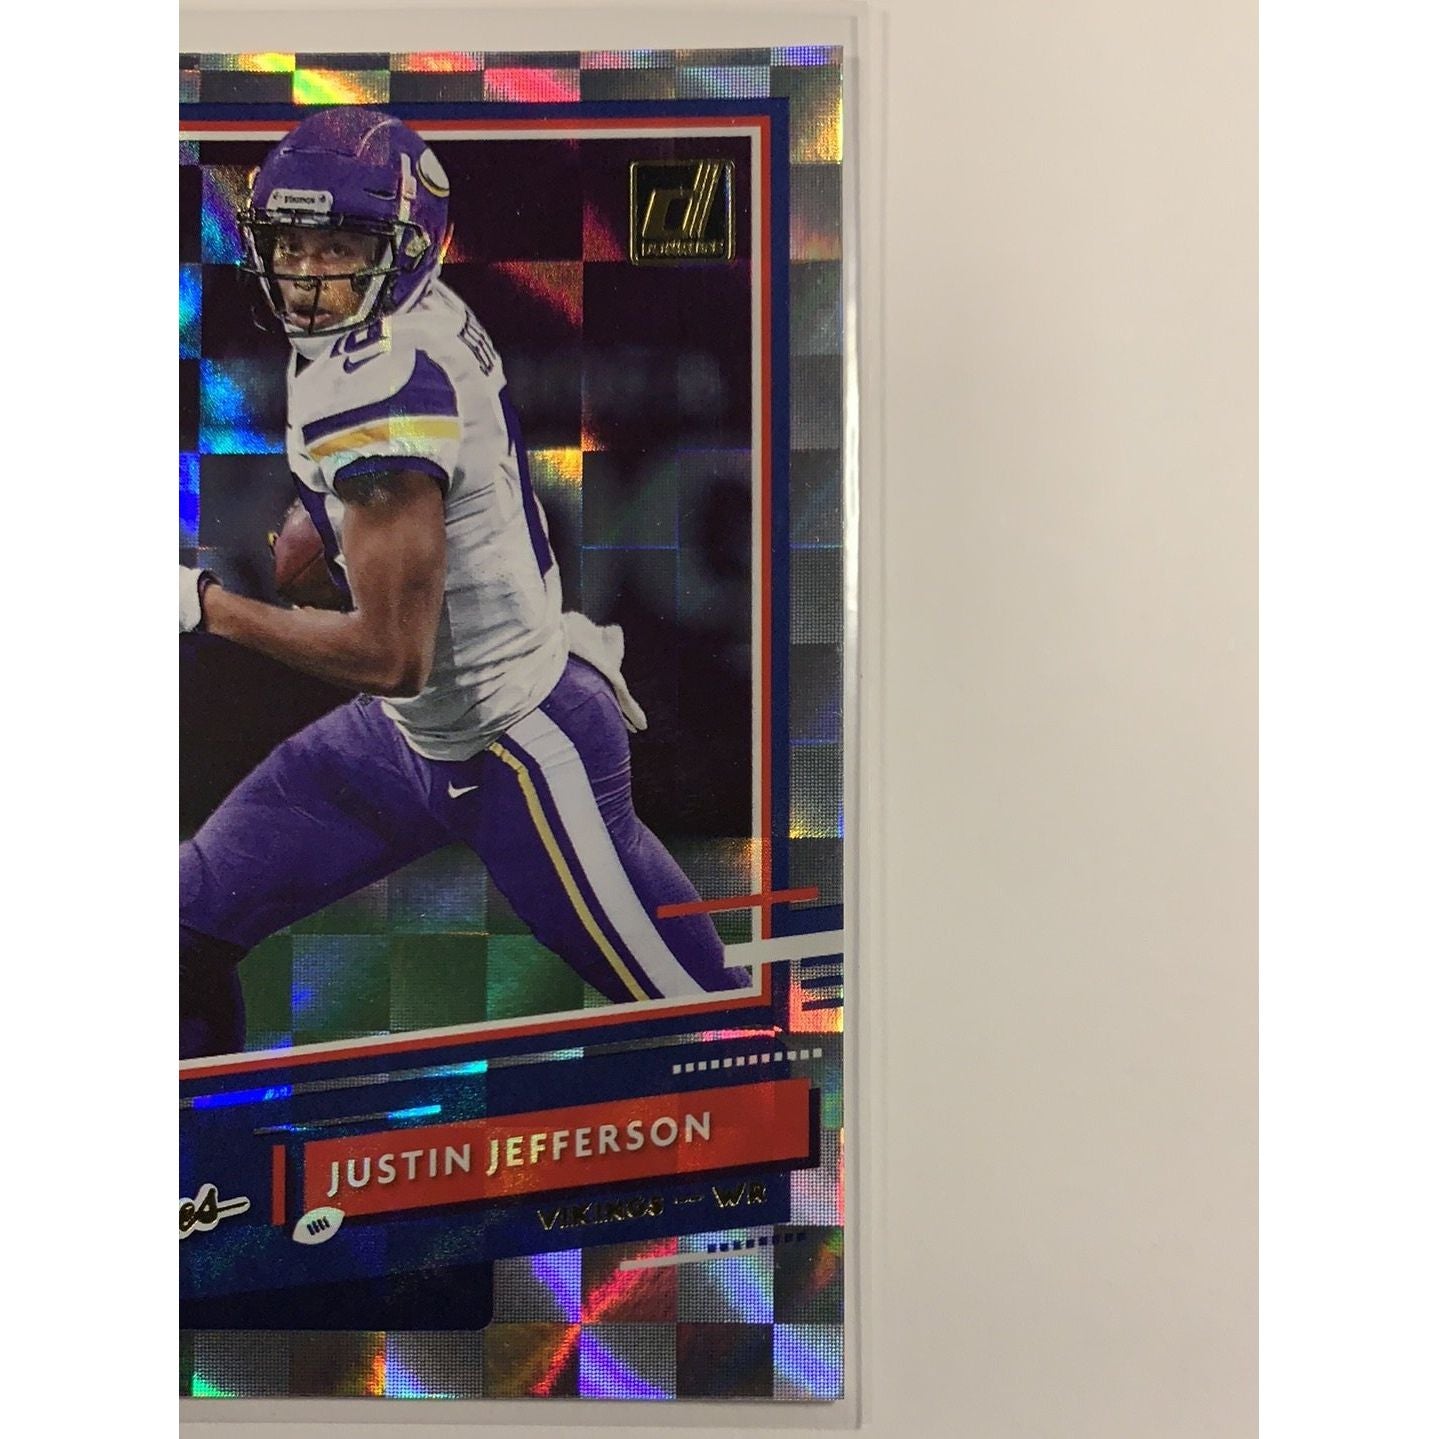  2020 Donruss Justin Jefferson The Rookies  Local Legends Cards & Collectibles